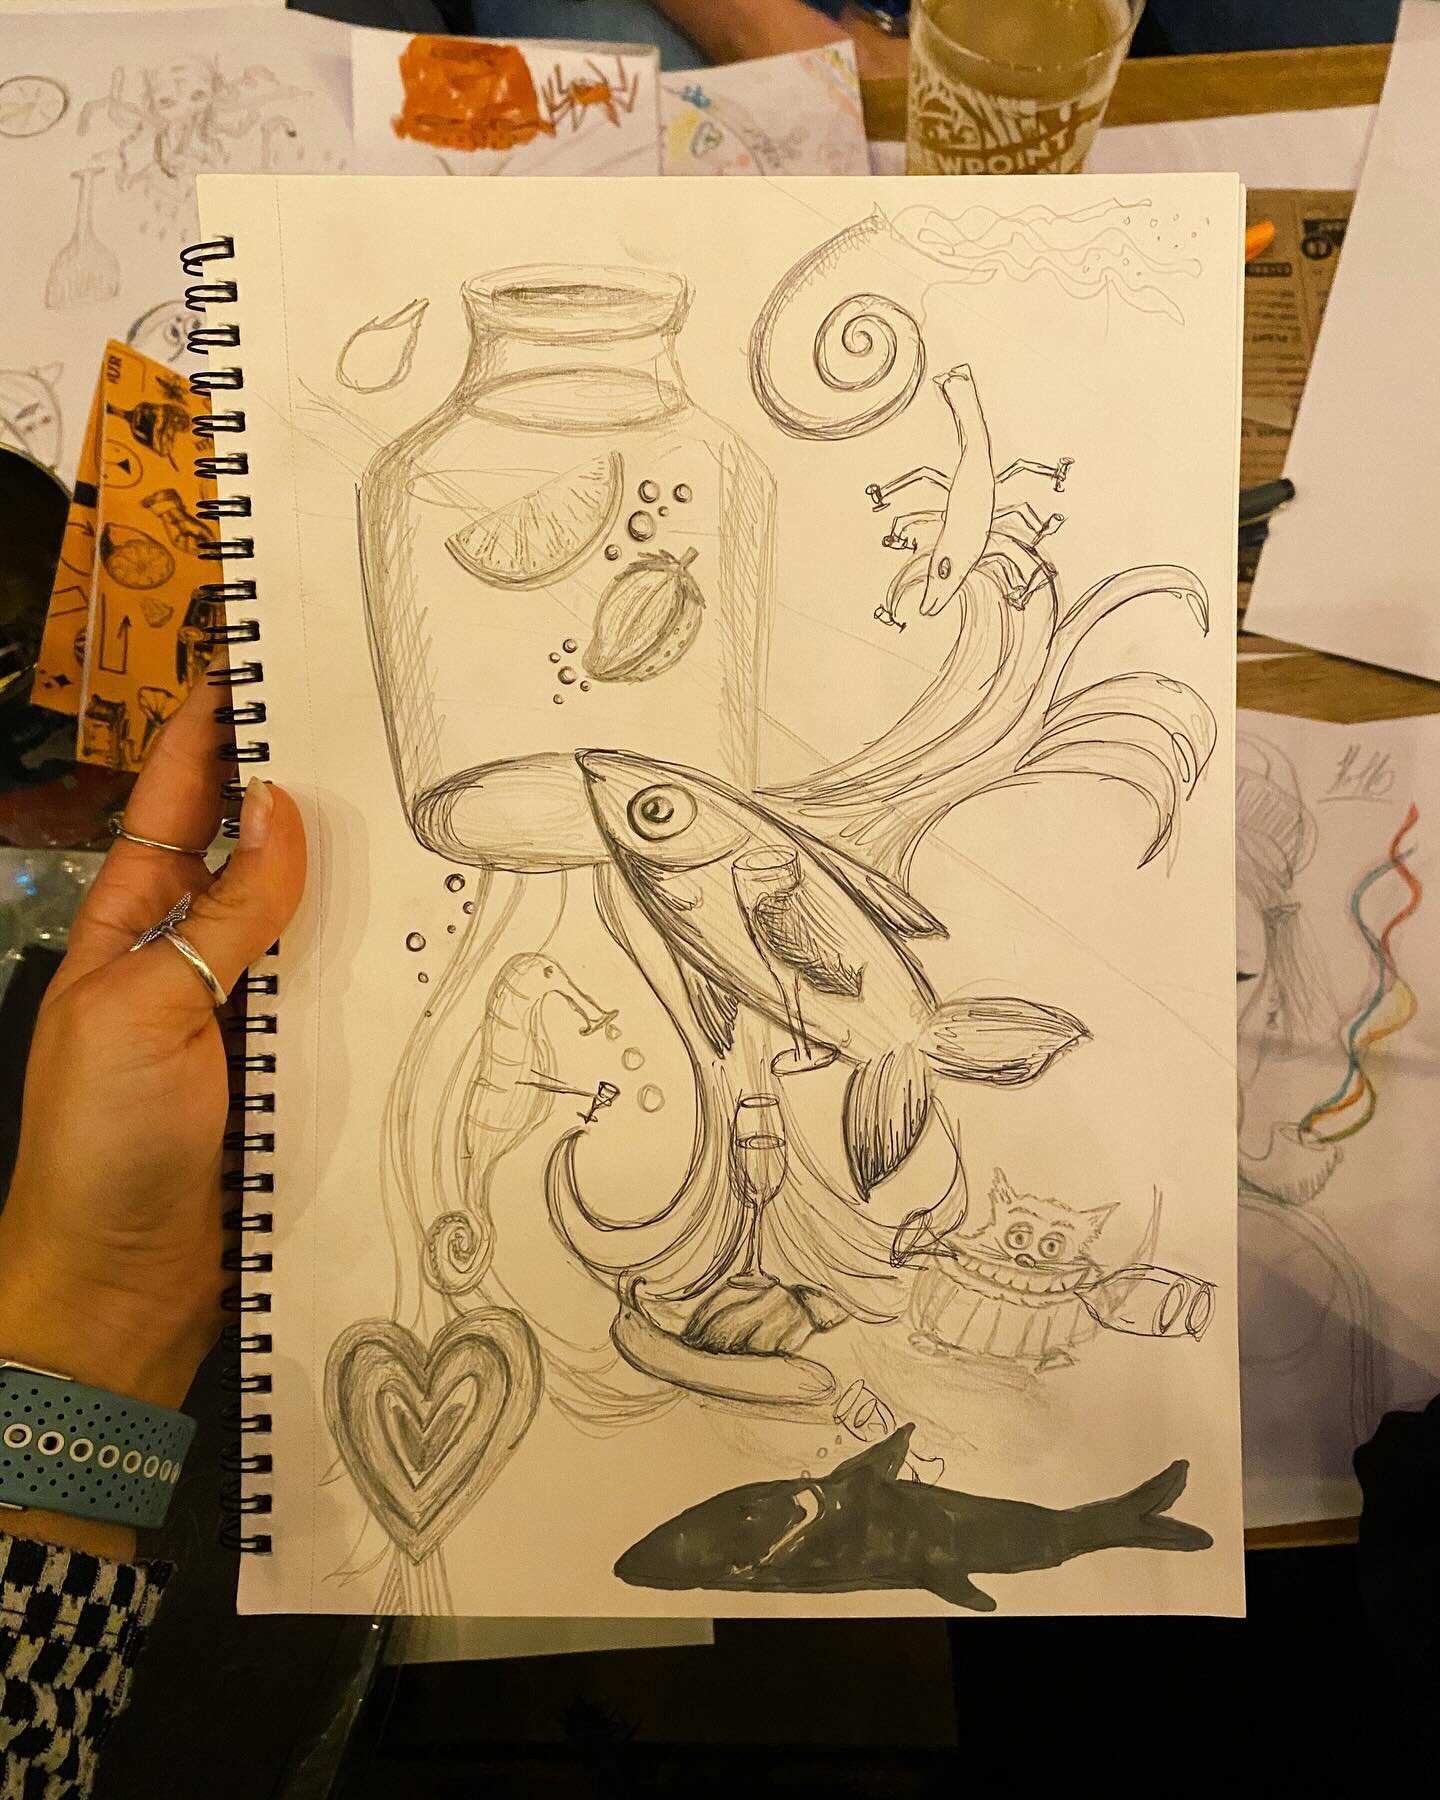 Some very interesting (and mildly concerning) dreamscapes from Wednesday&rsquo;s session ✏️

Thanks to @the.salisbury.arms for being great hosts as always!

More sketches coming soon!

#sketchandsocial #dreamscapes #camcreatives #cambridge